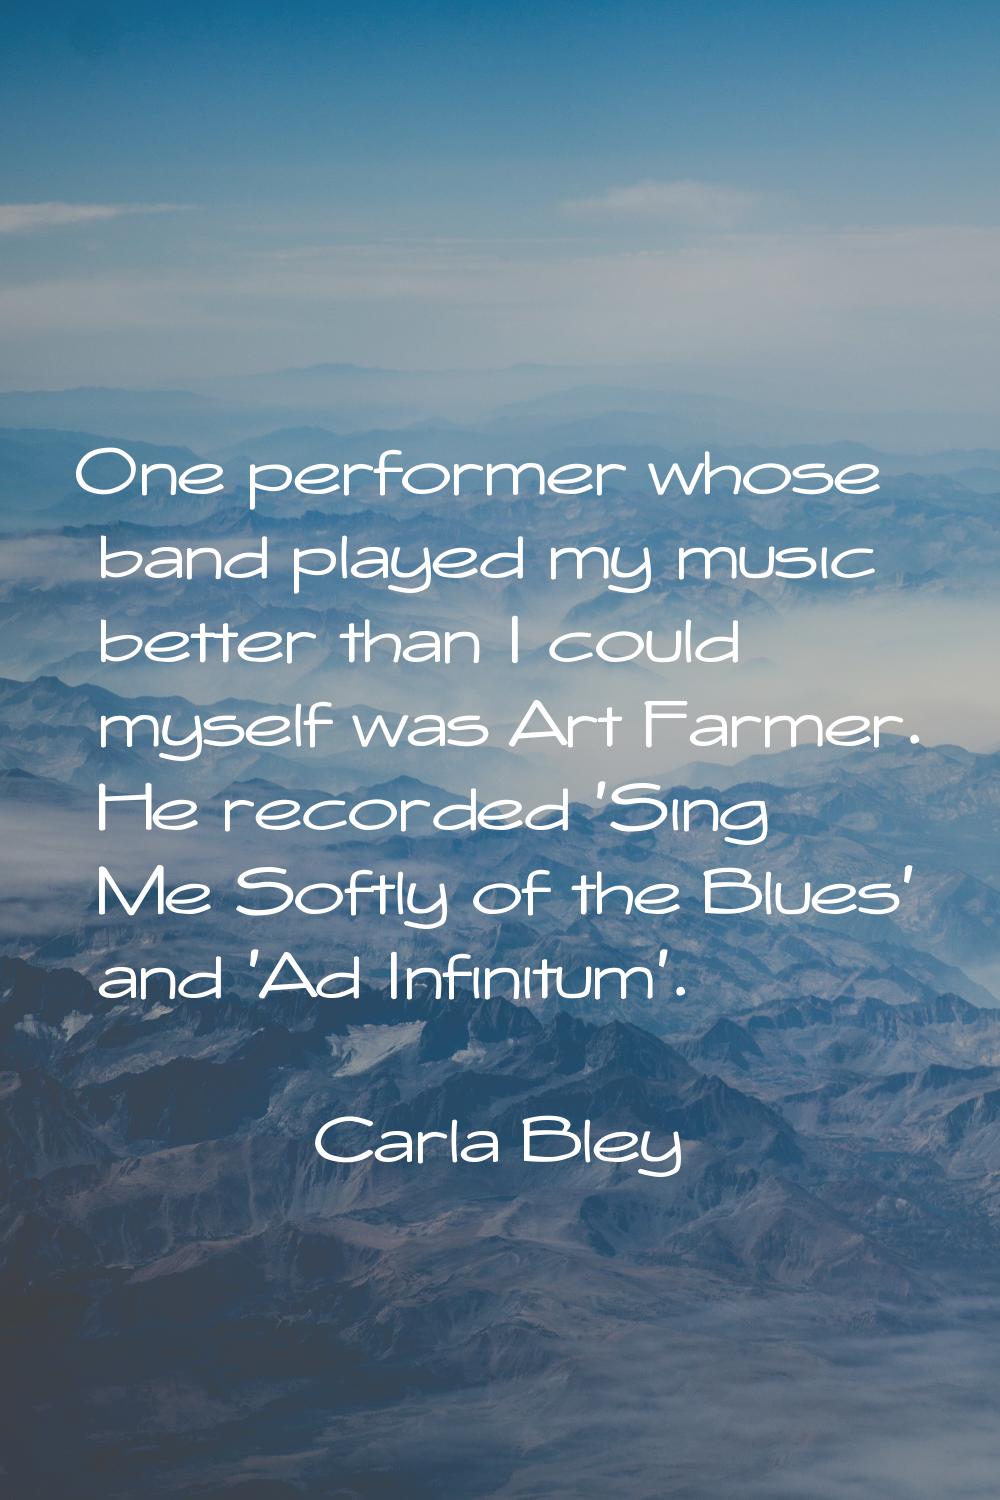 One performer whose band played my music better than I could myself was Art Farmer. He recorded 'Si